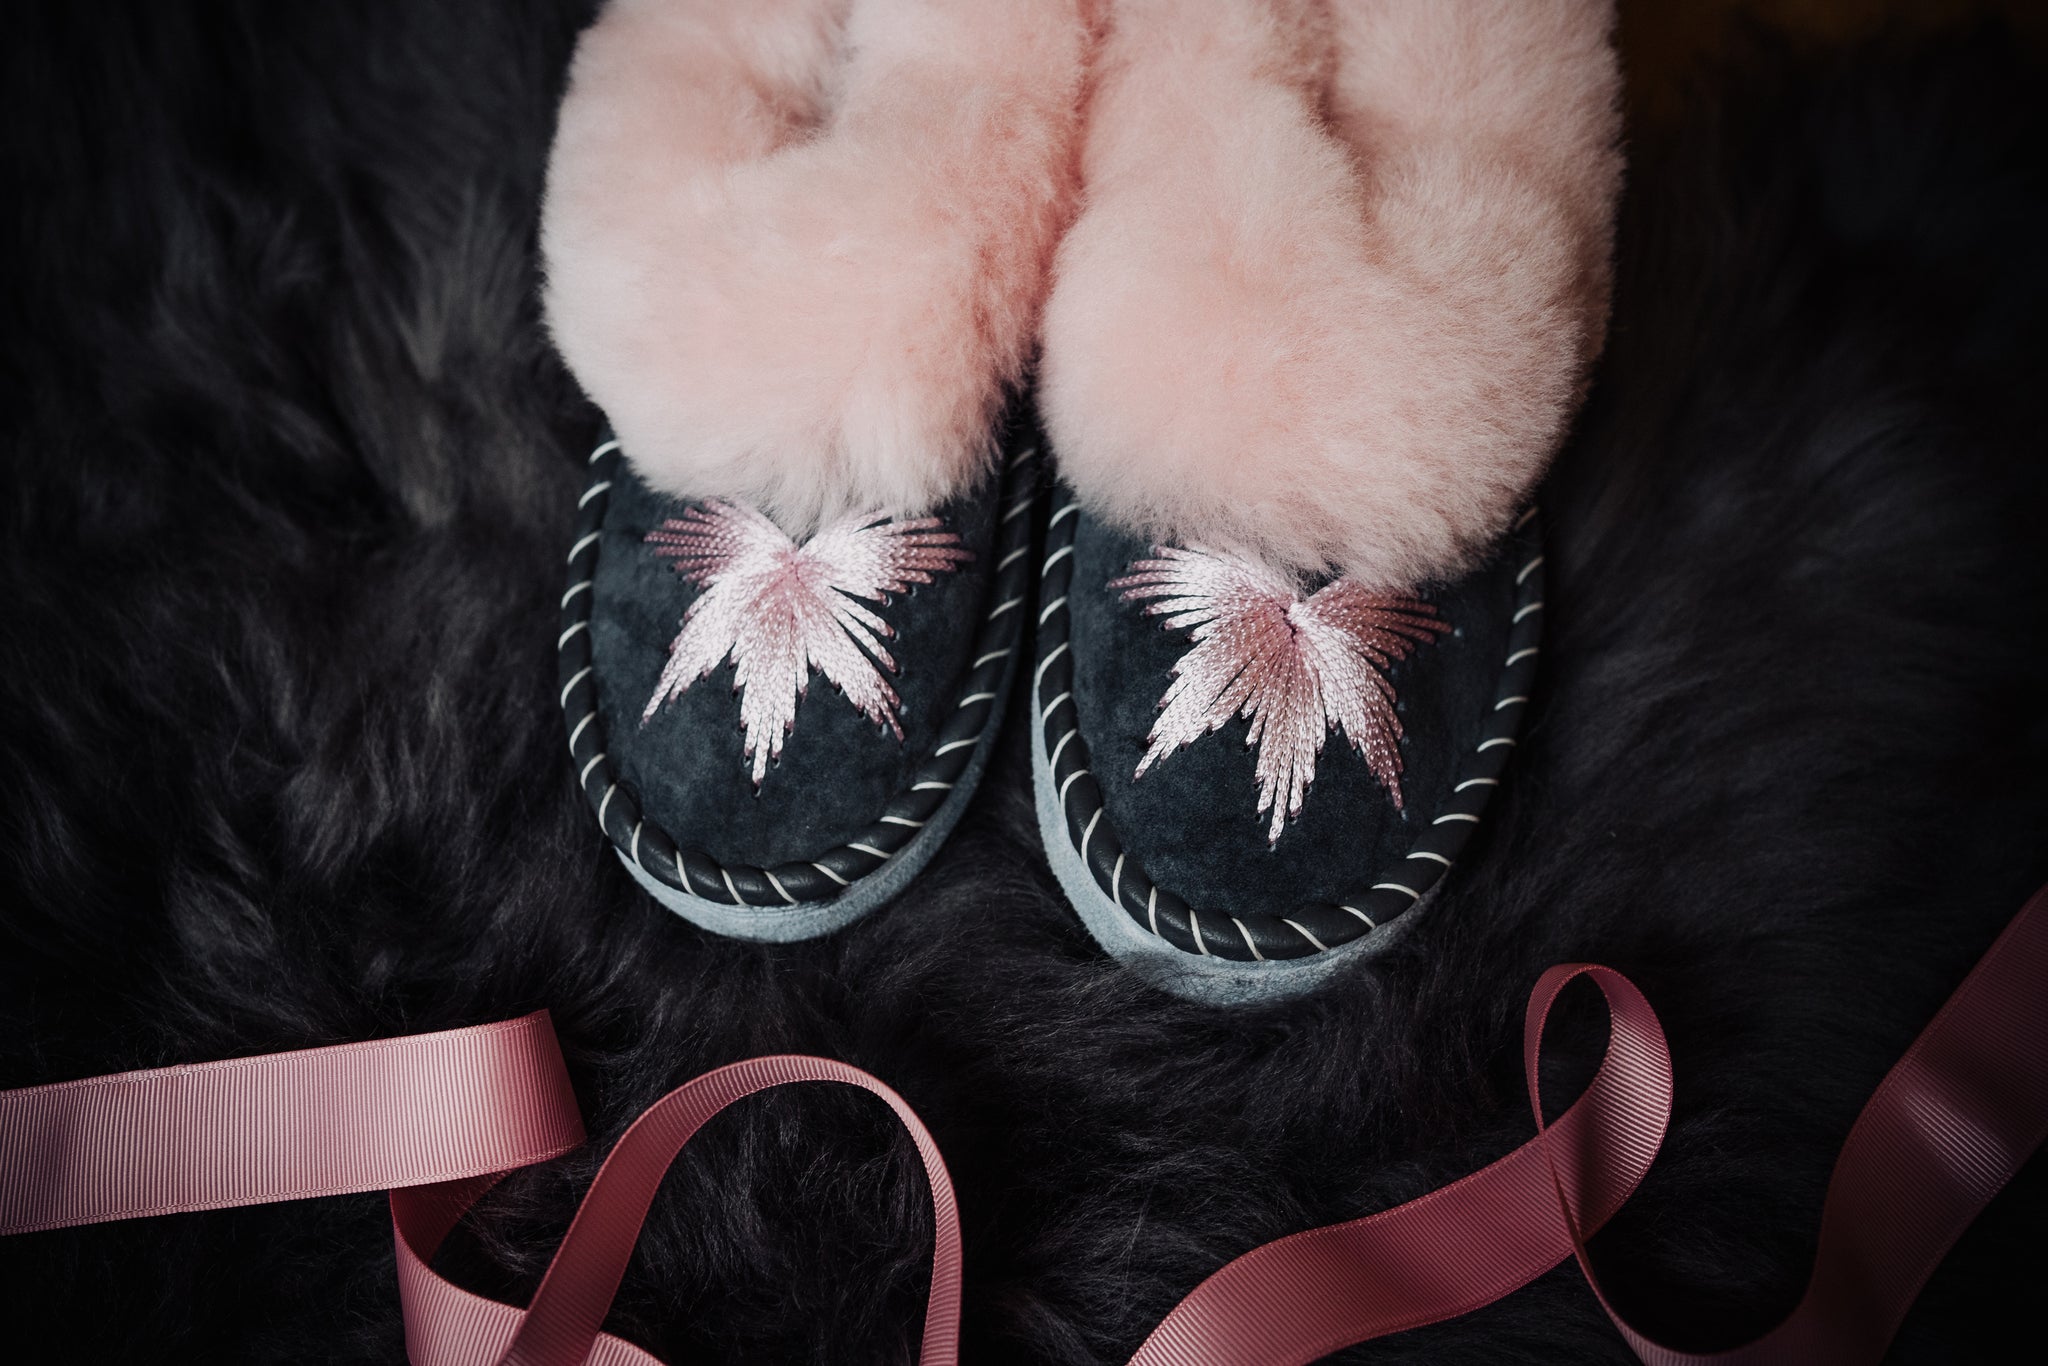 Pink candy sheepskin slippers with a pink rim and grey leather, exquisitely hand-embroidered with pink silk thread, resting on a fluffy grey sheepskin with pink ribbon decoration.